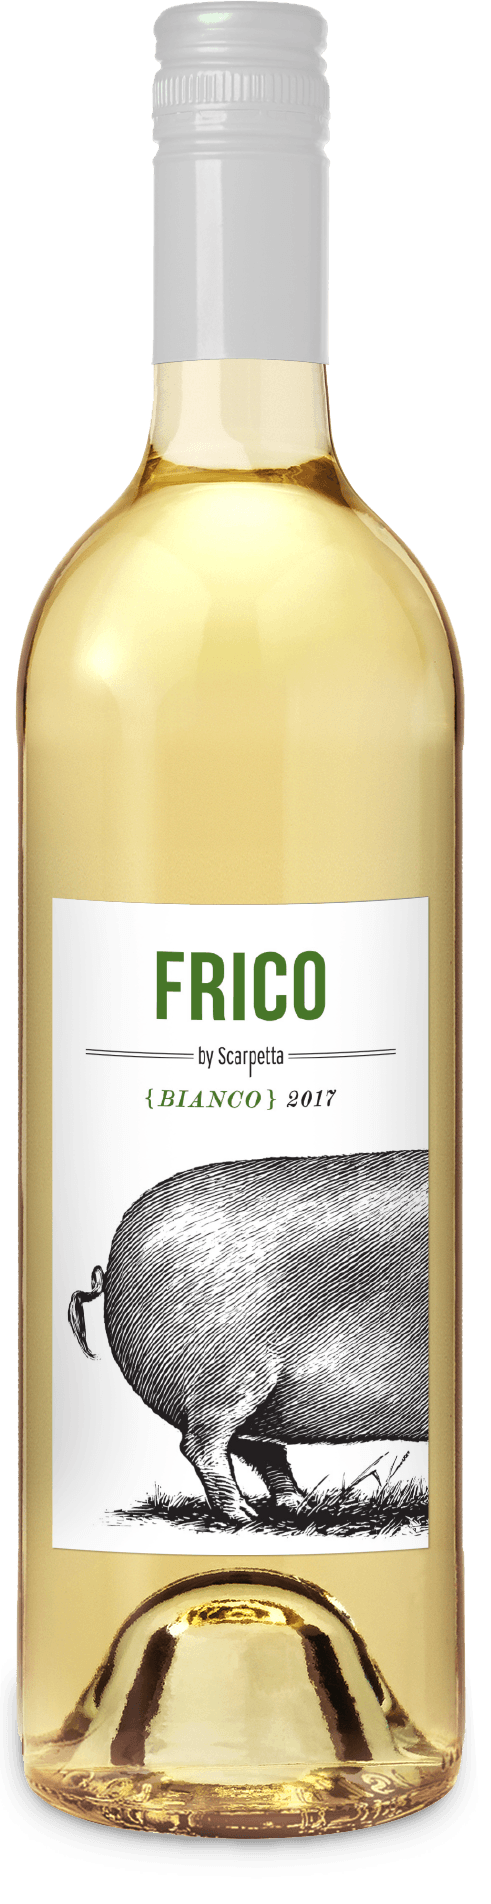 Image for Frico Bianco